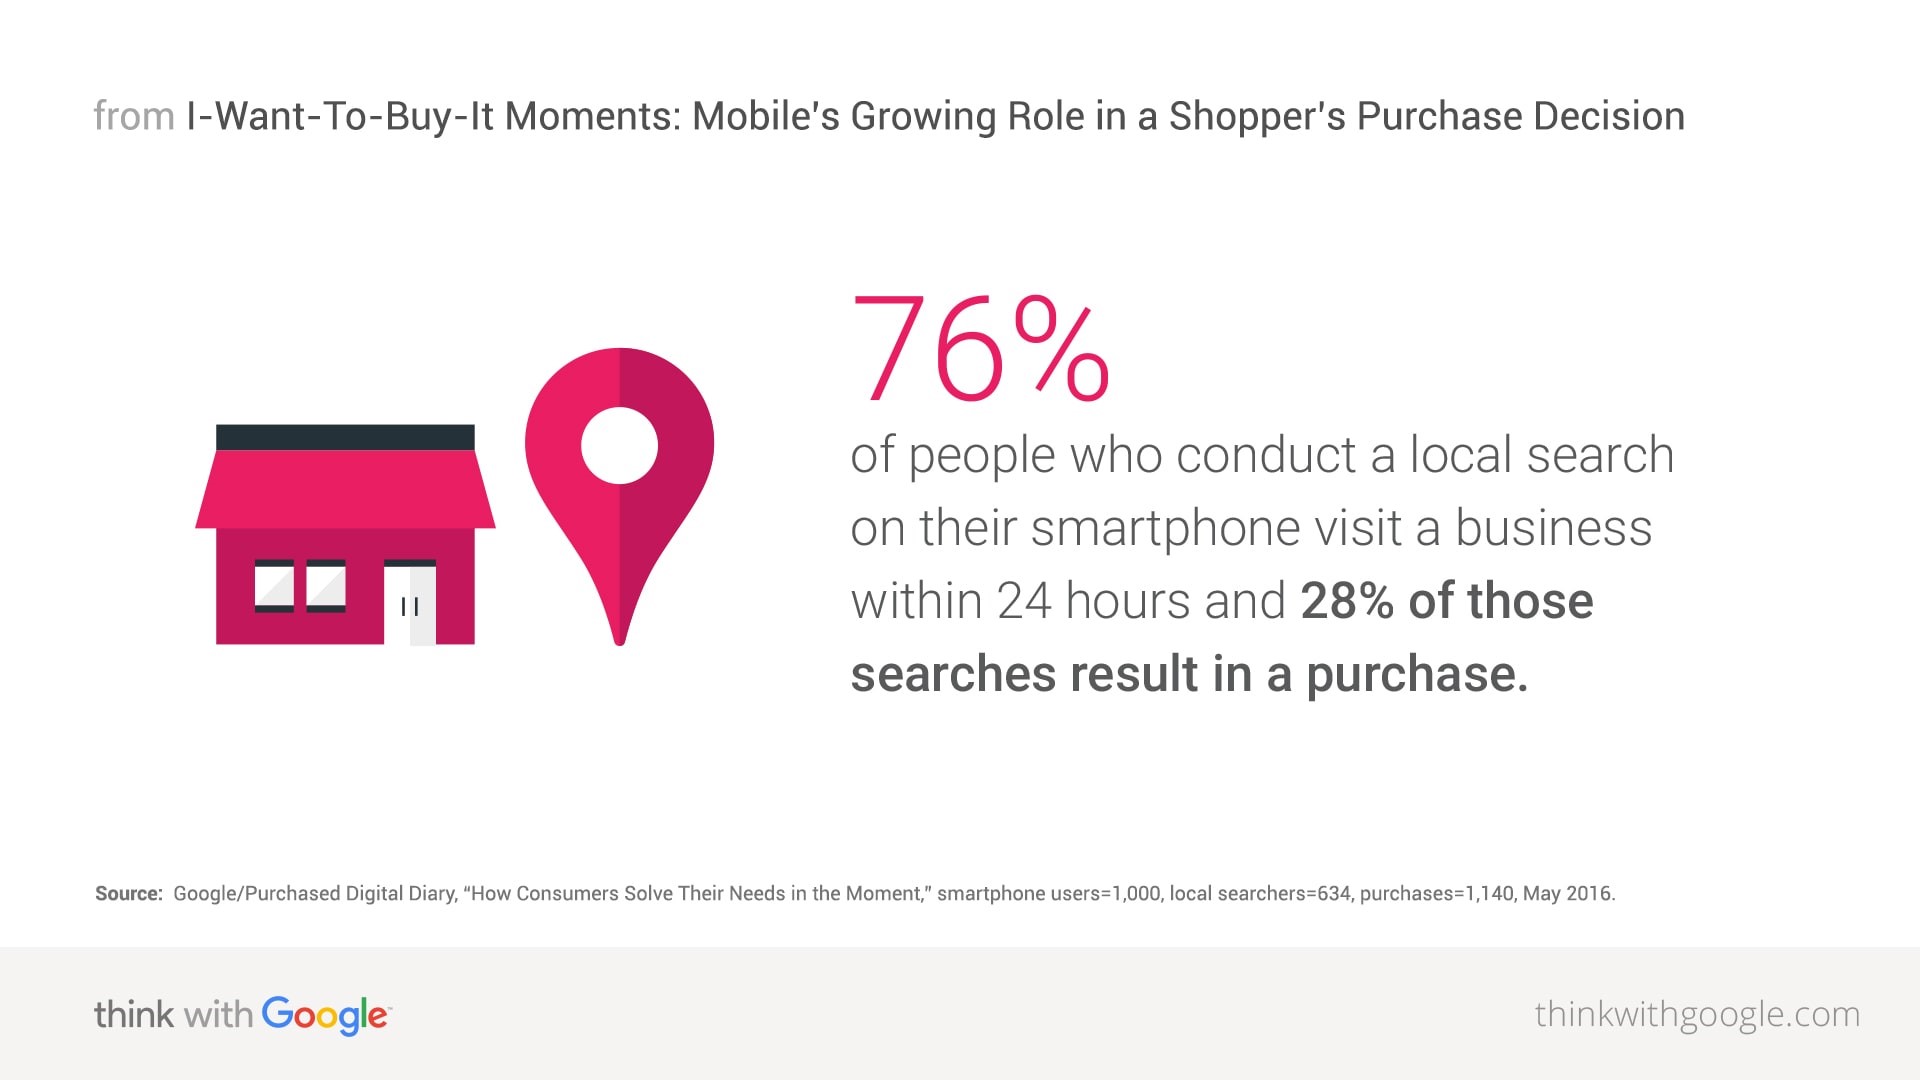 Google - 76% of people who search on the mobile visit in a business within 24 hours